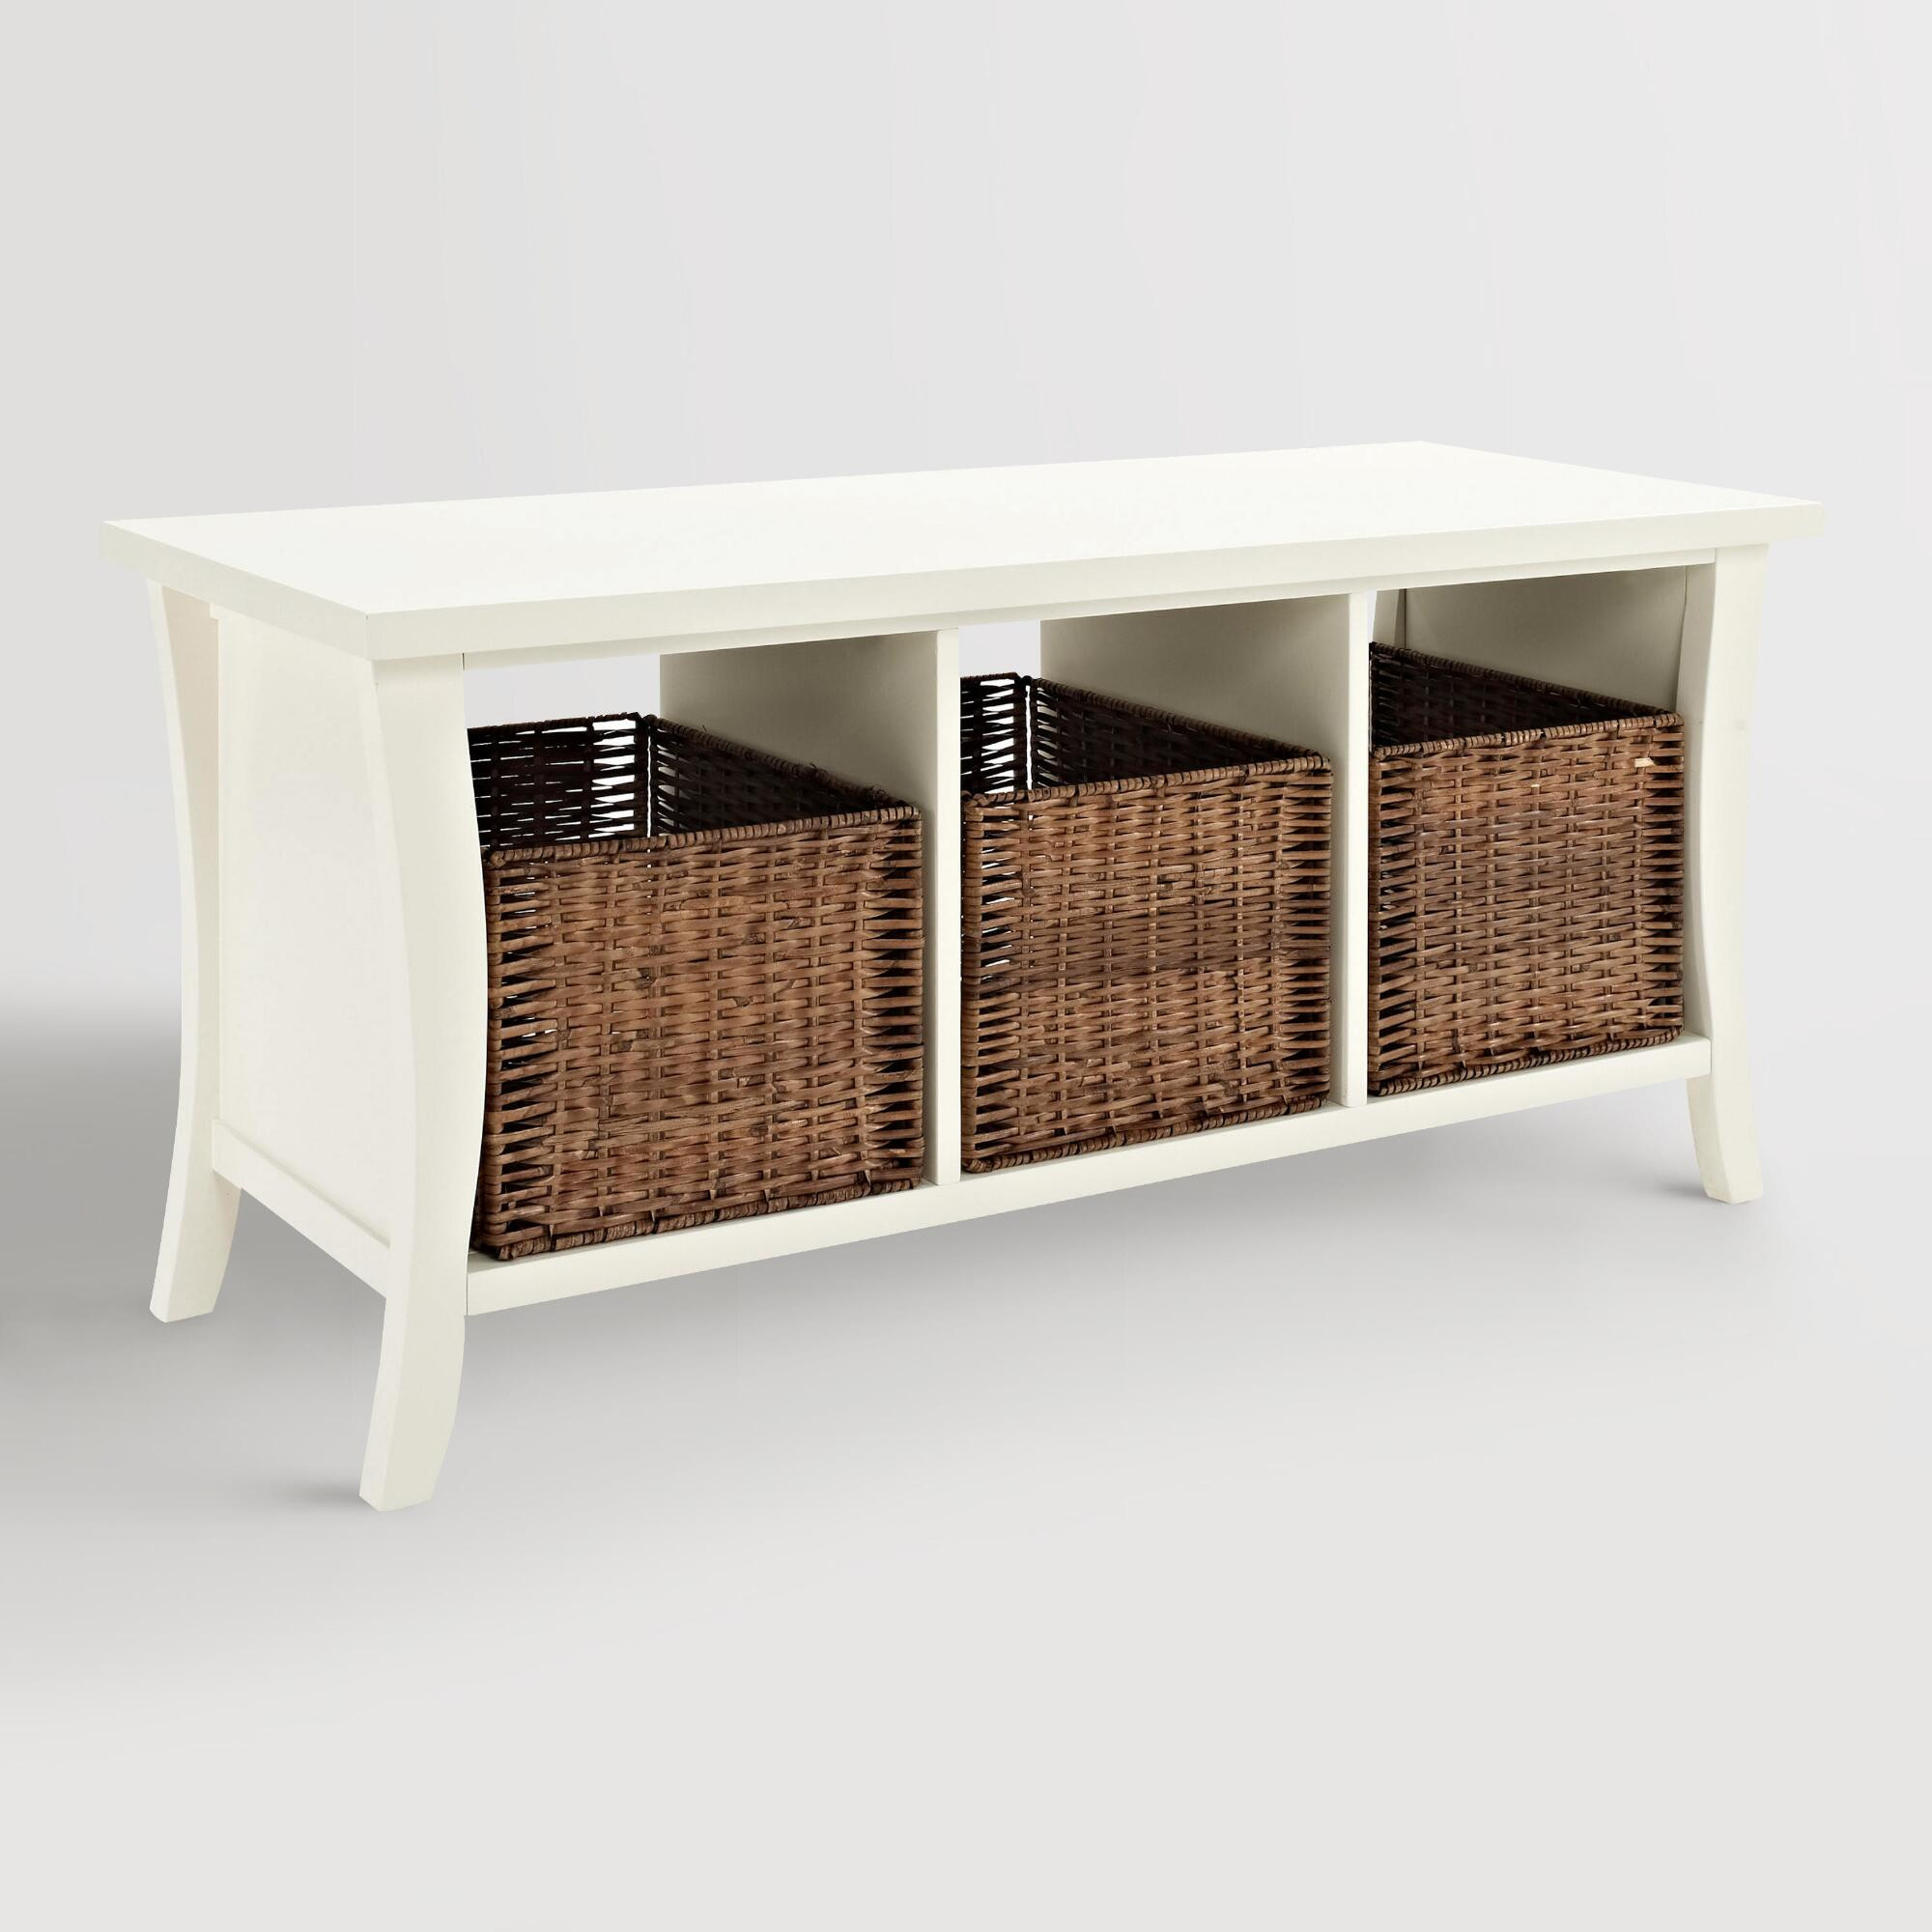 Storage Bench With Baskets
 White Wood Cassia Entryway Storage Bench with Baskets